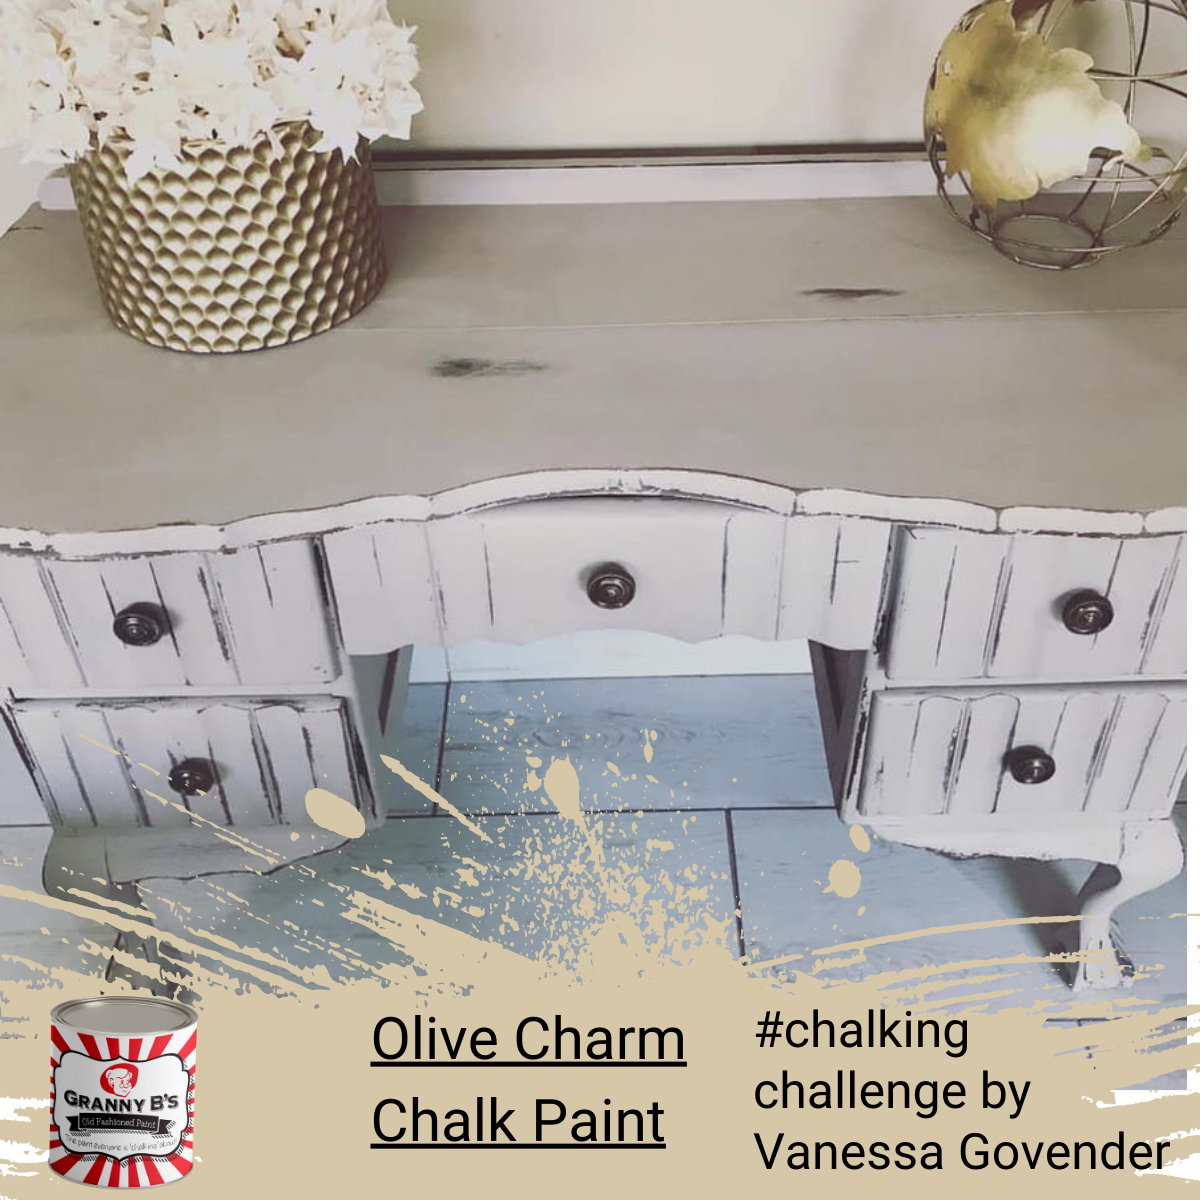 Chalkpaint - Olive Charm (Olive) - Granny B's Old Fashioned Paint